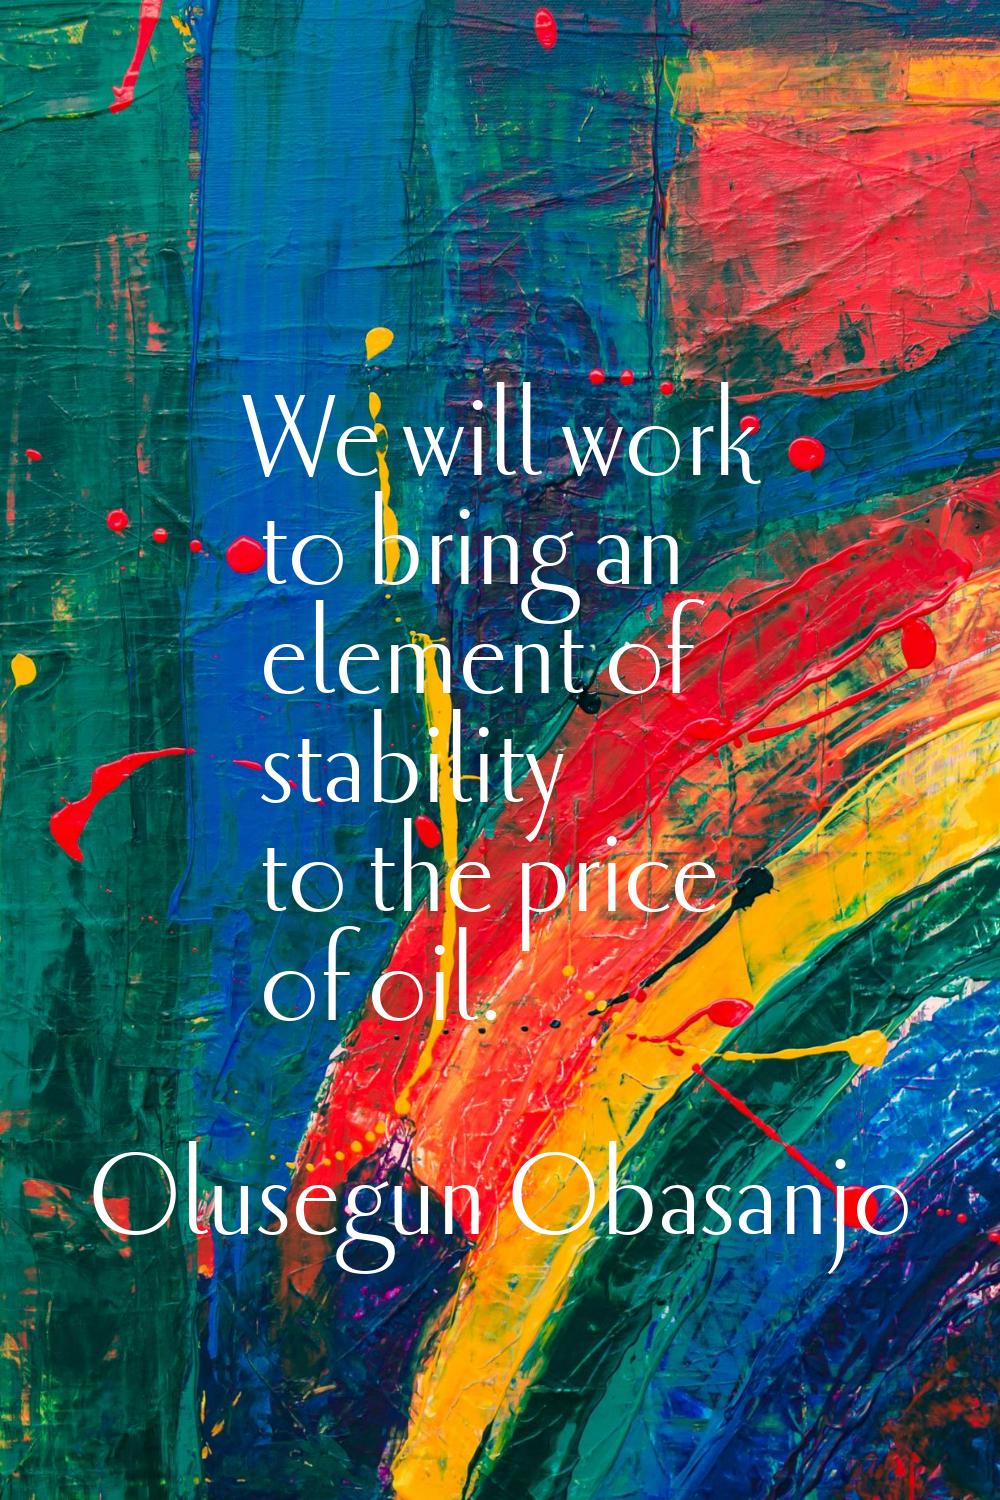 We will work to bring an element of stability to the price of oil.